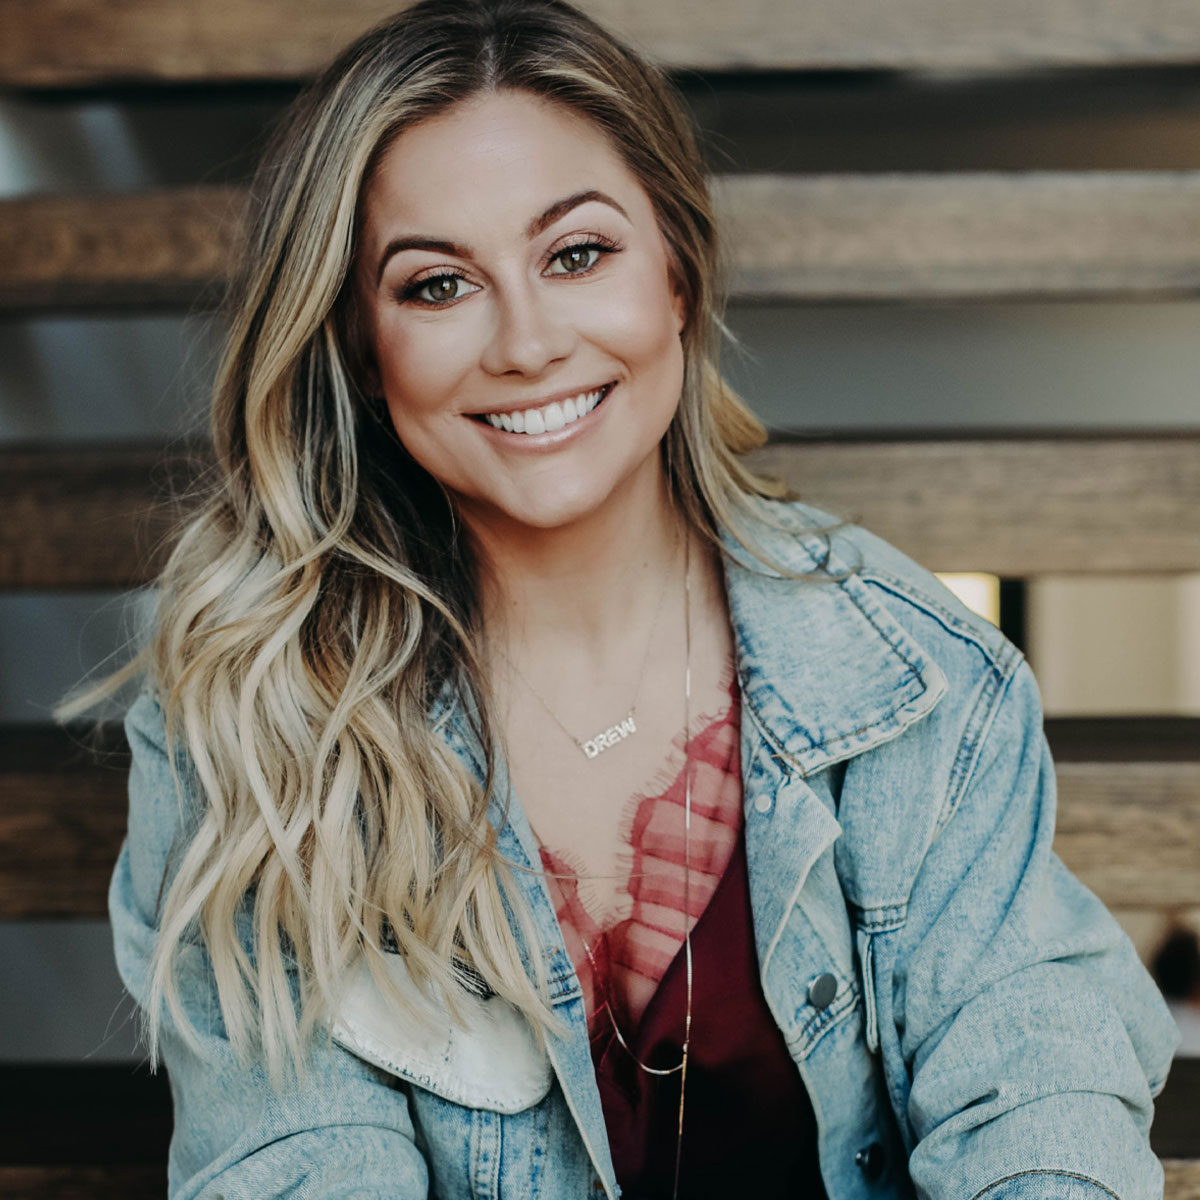 Shawn Johnson Shares the Kitchen Hacks That Make Her Life Easier